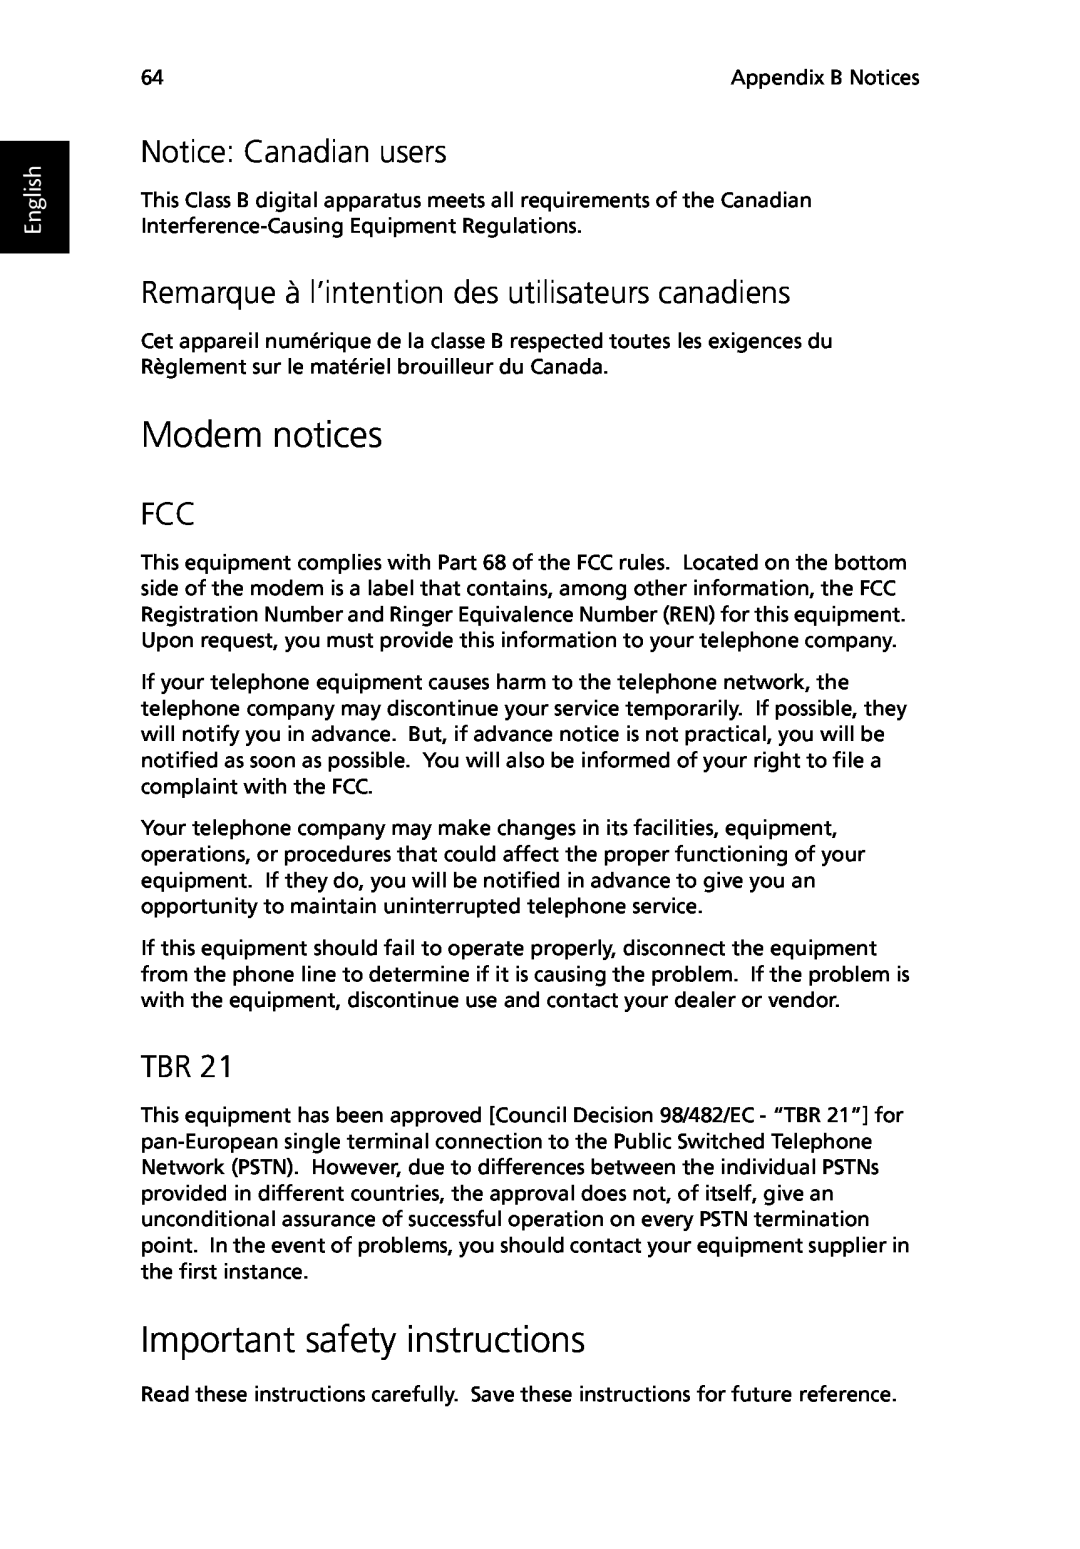 Acer TravelMate 530 manual Modem notices, Important safety instructions, Notice Canadian users, English 